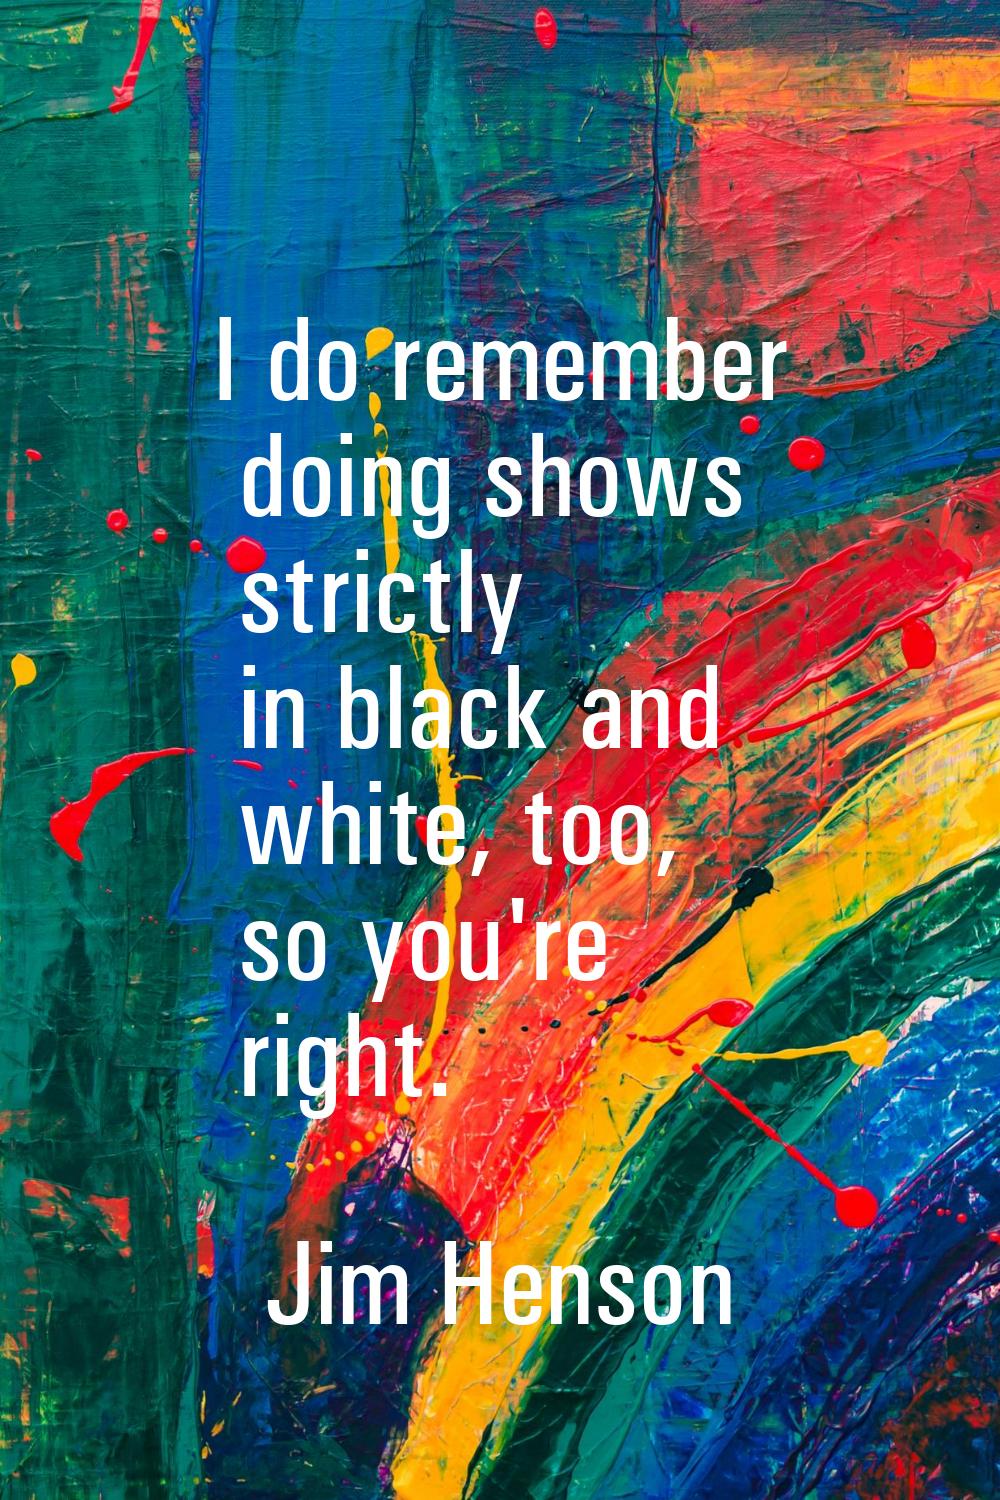 I do remember doing shows strictly in black and white, too, so you're right.